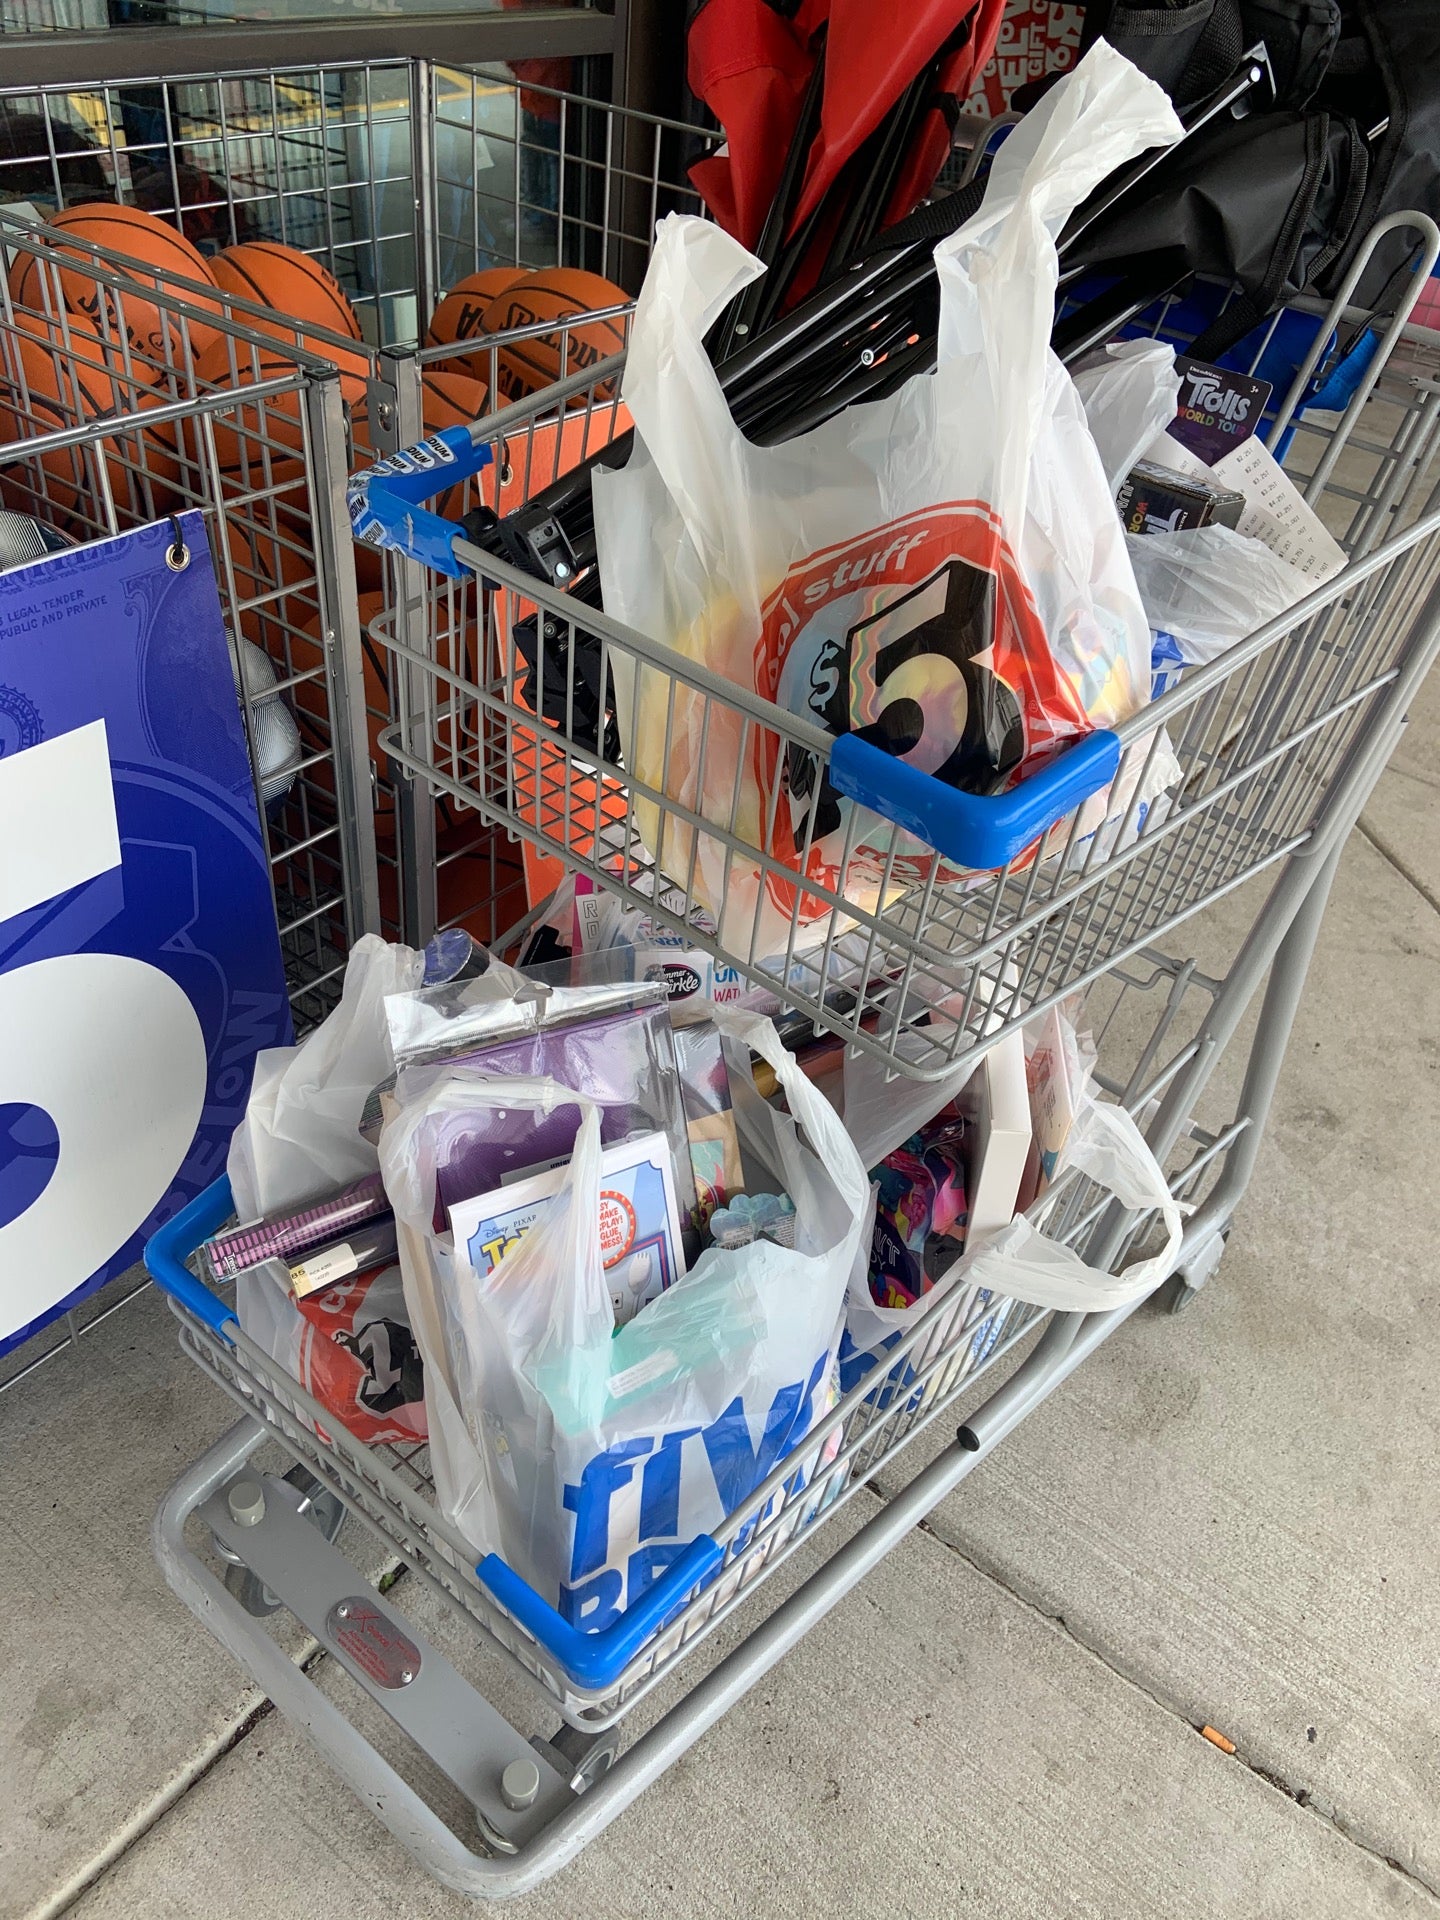 Five Below: Photo Tour Shows How Fitness and Beauty Merchandise